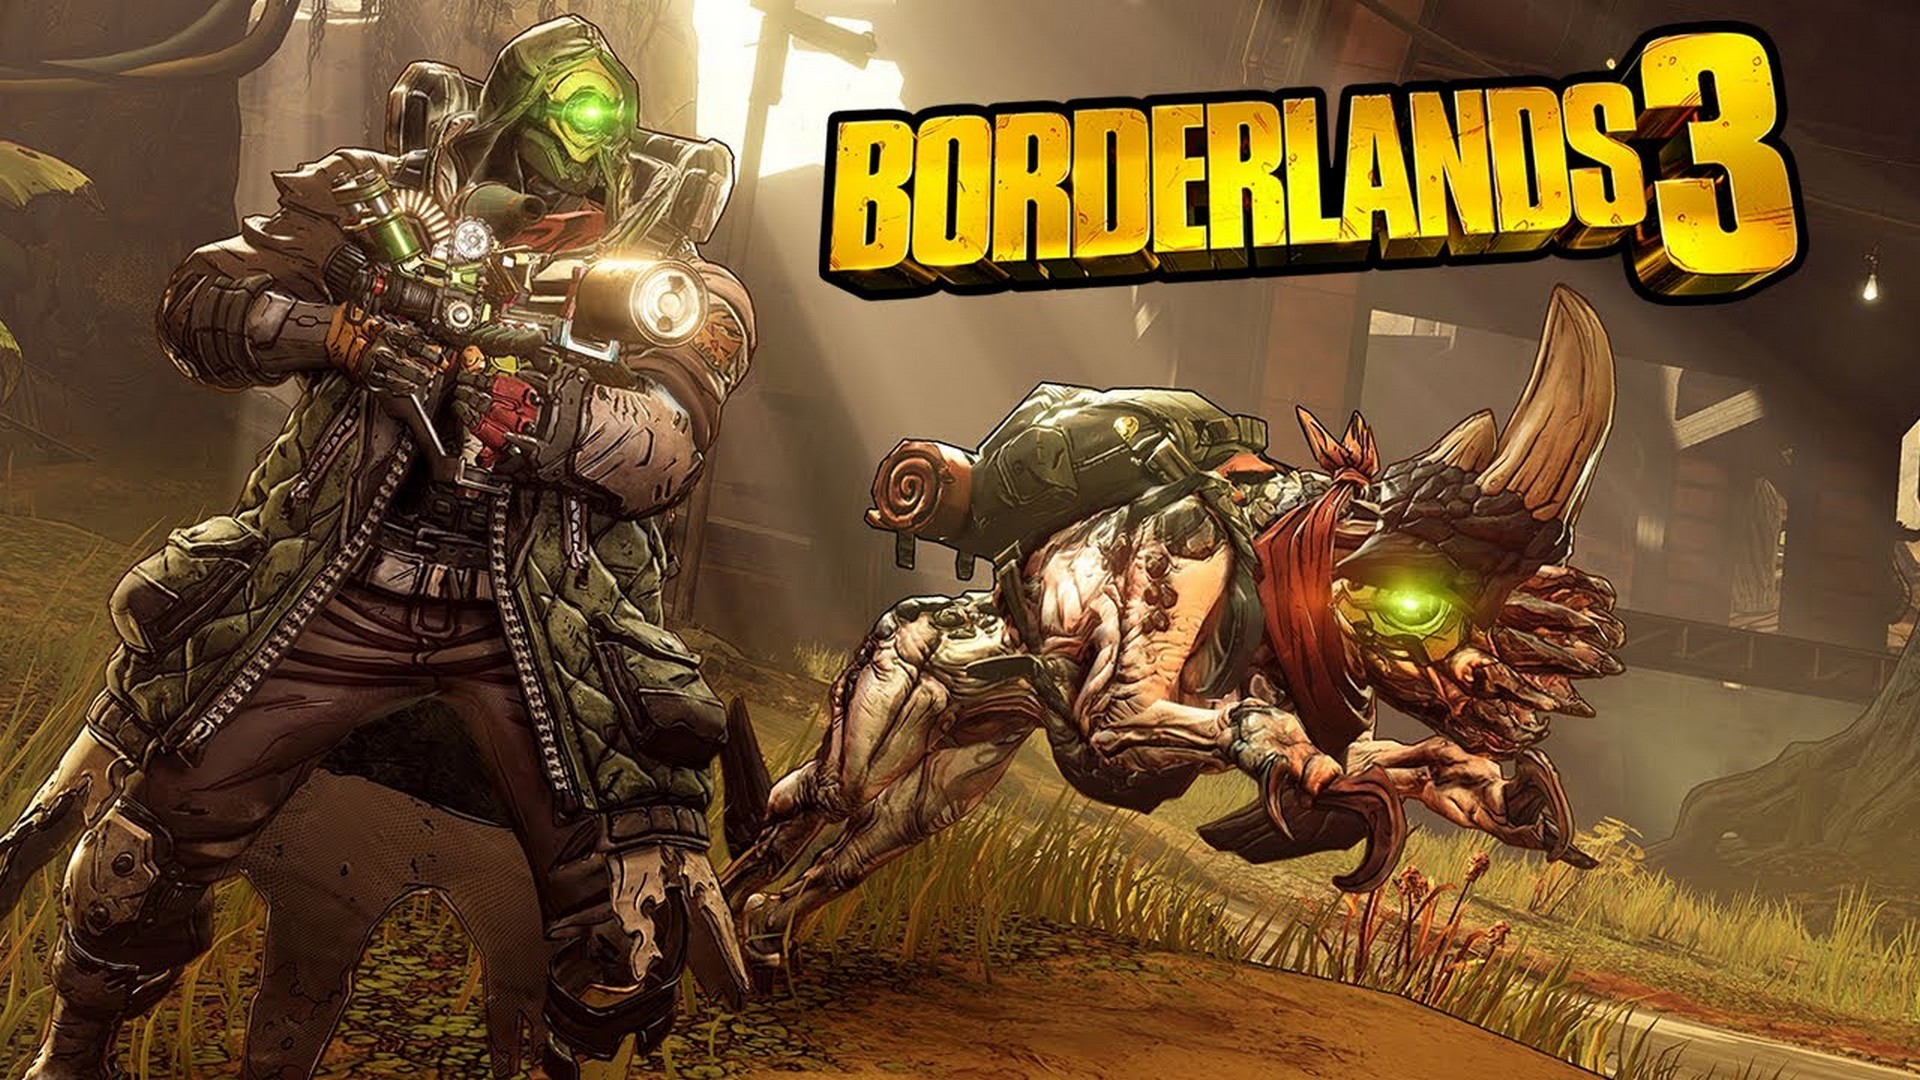 New Borderlands 3 Content, Features, and Plans Revealed During PAX Online